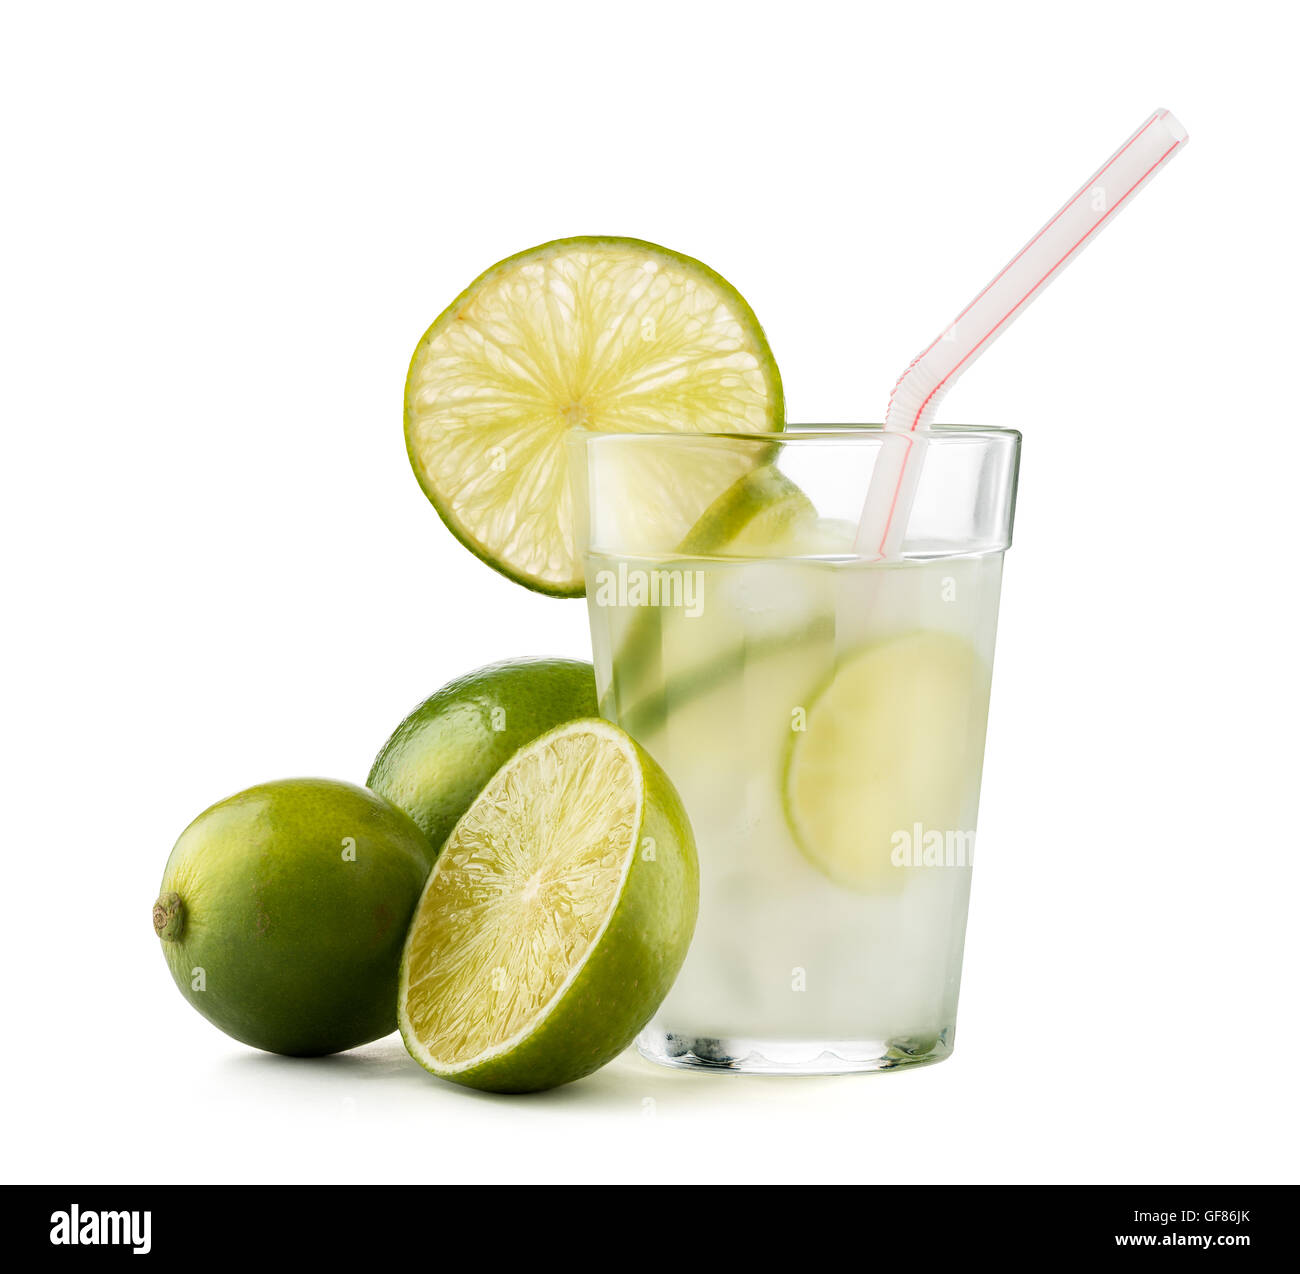 Caipirinha - brazilian's national cocktail made with cachaca, sugar and lemon or lime, isolated on white with clipping path Stock Photo